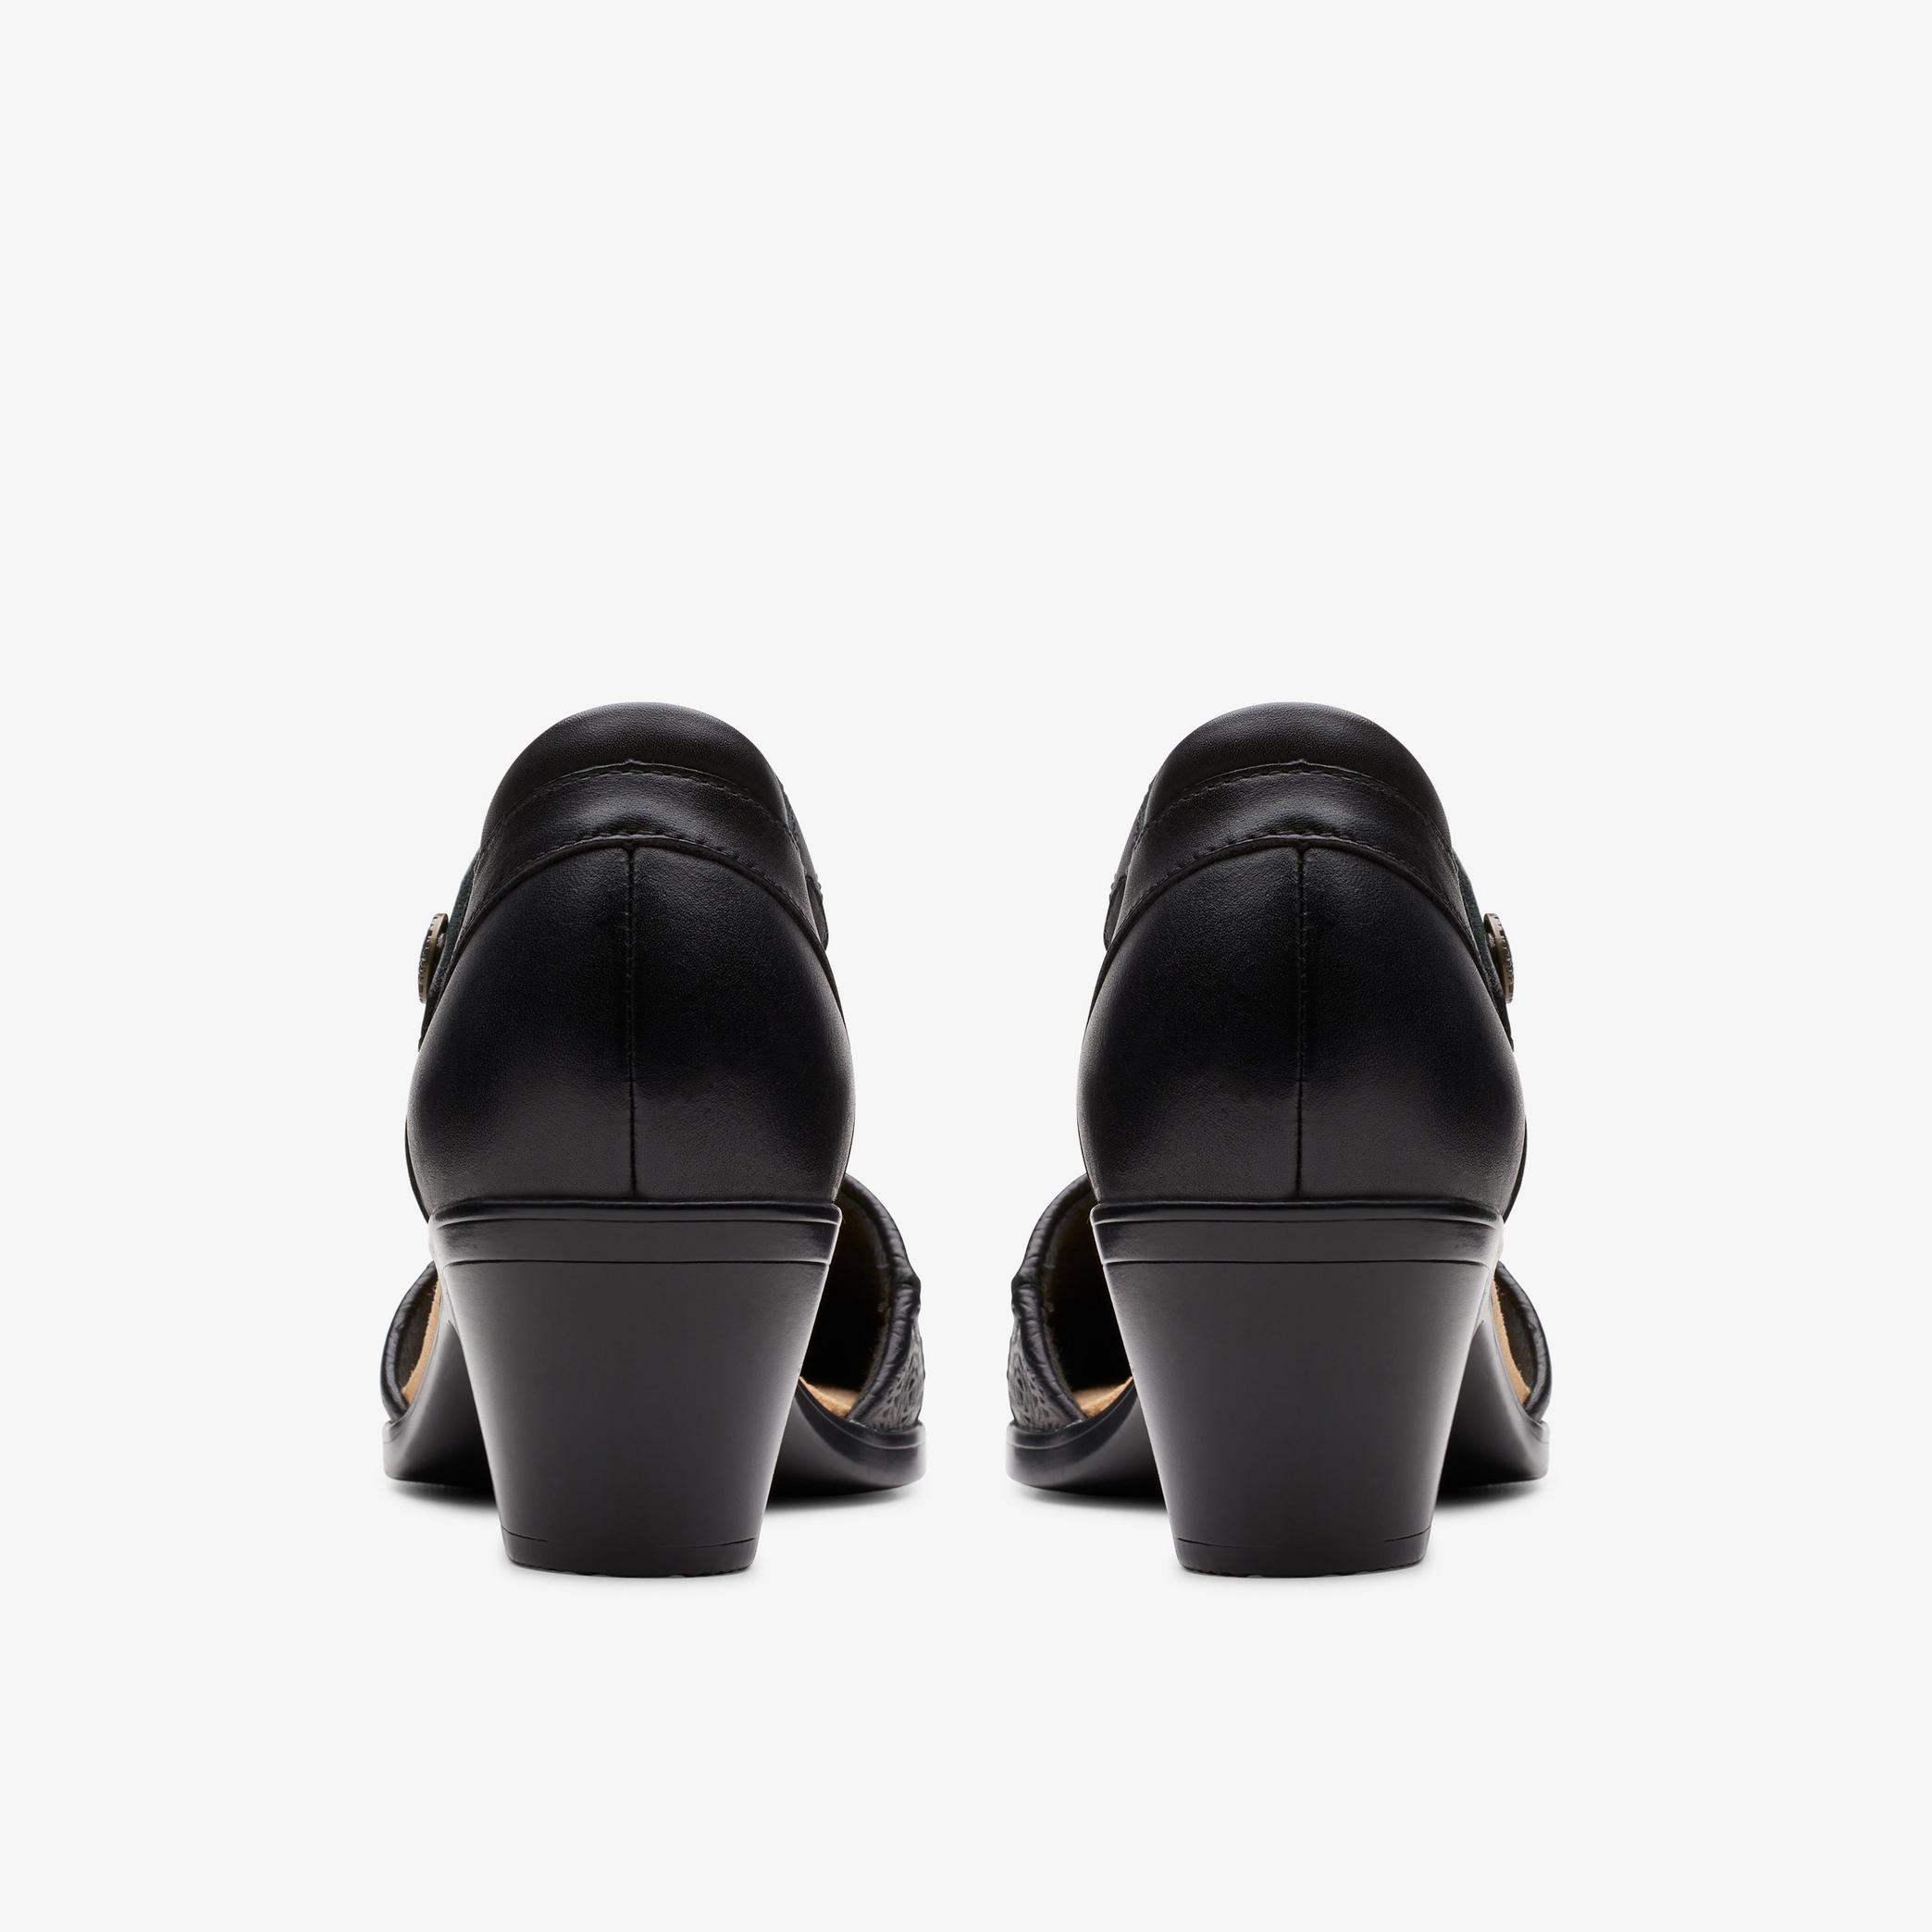 WOMENS Emily 2 Ketra Black Leather Heeled Sandals | Clarks US